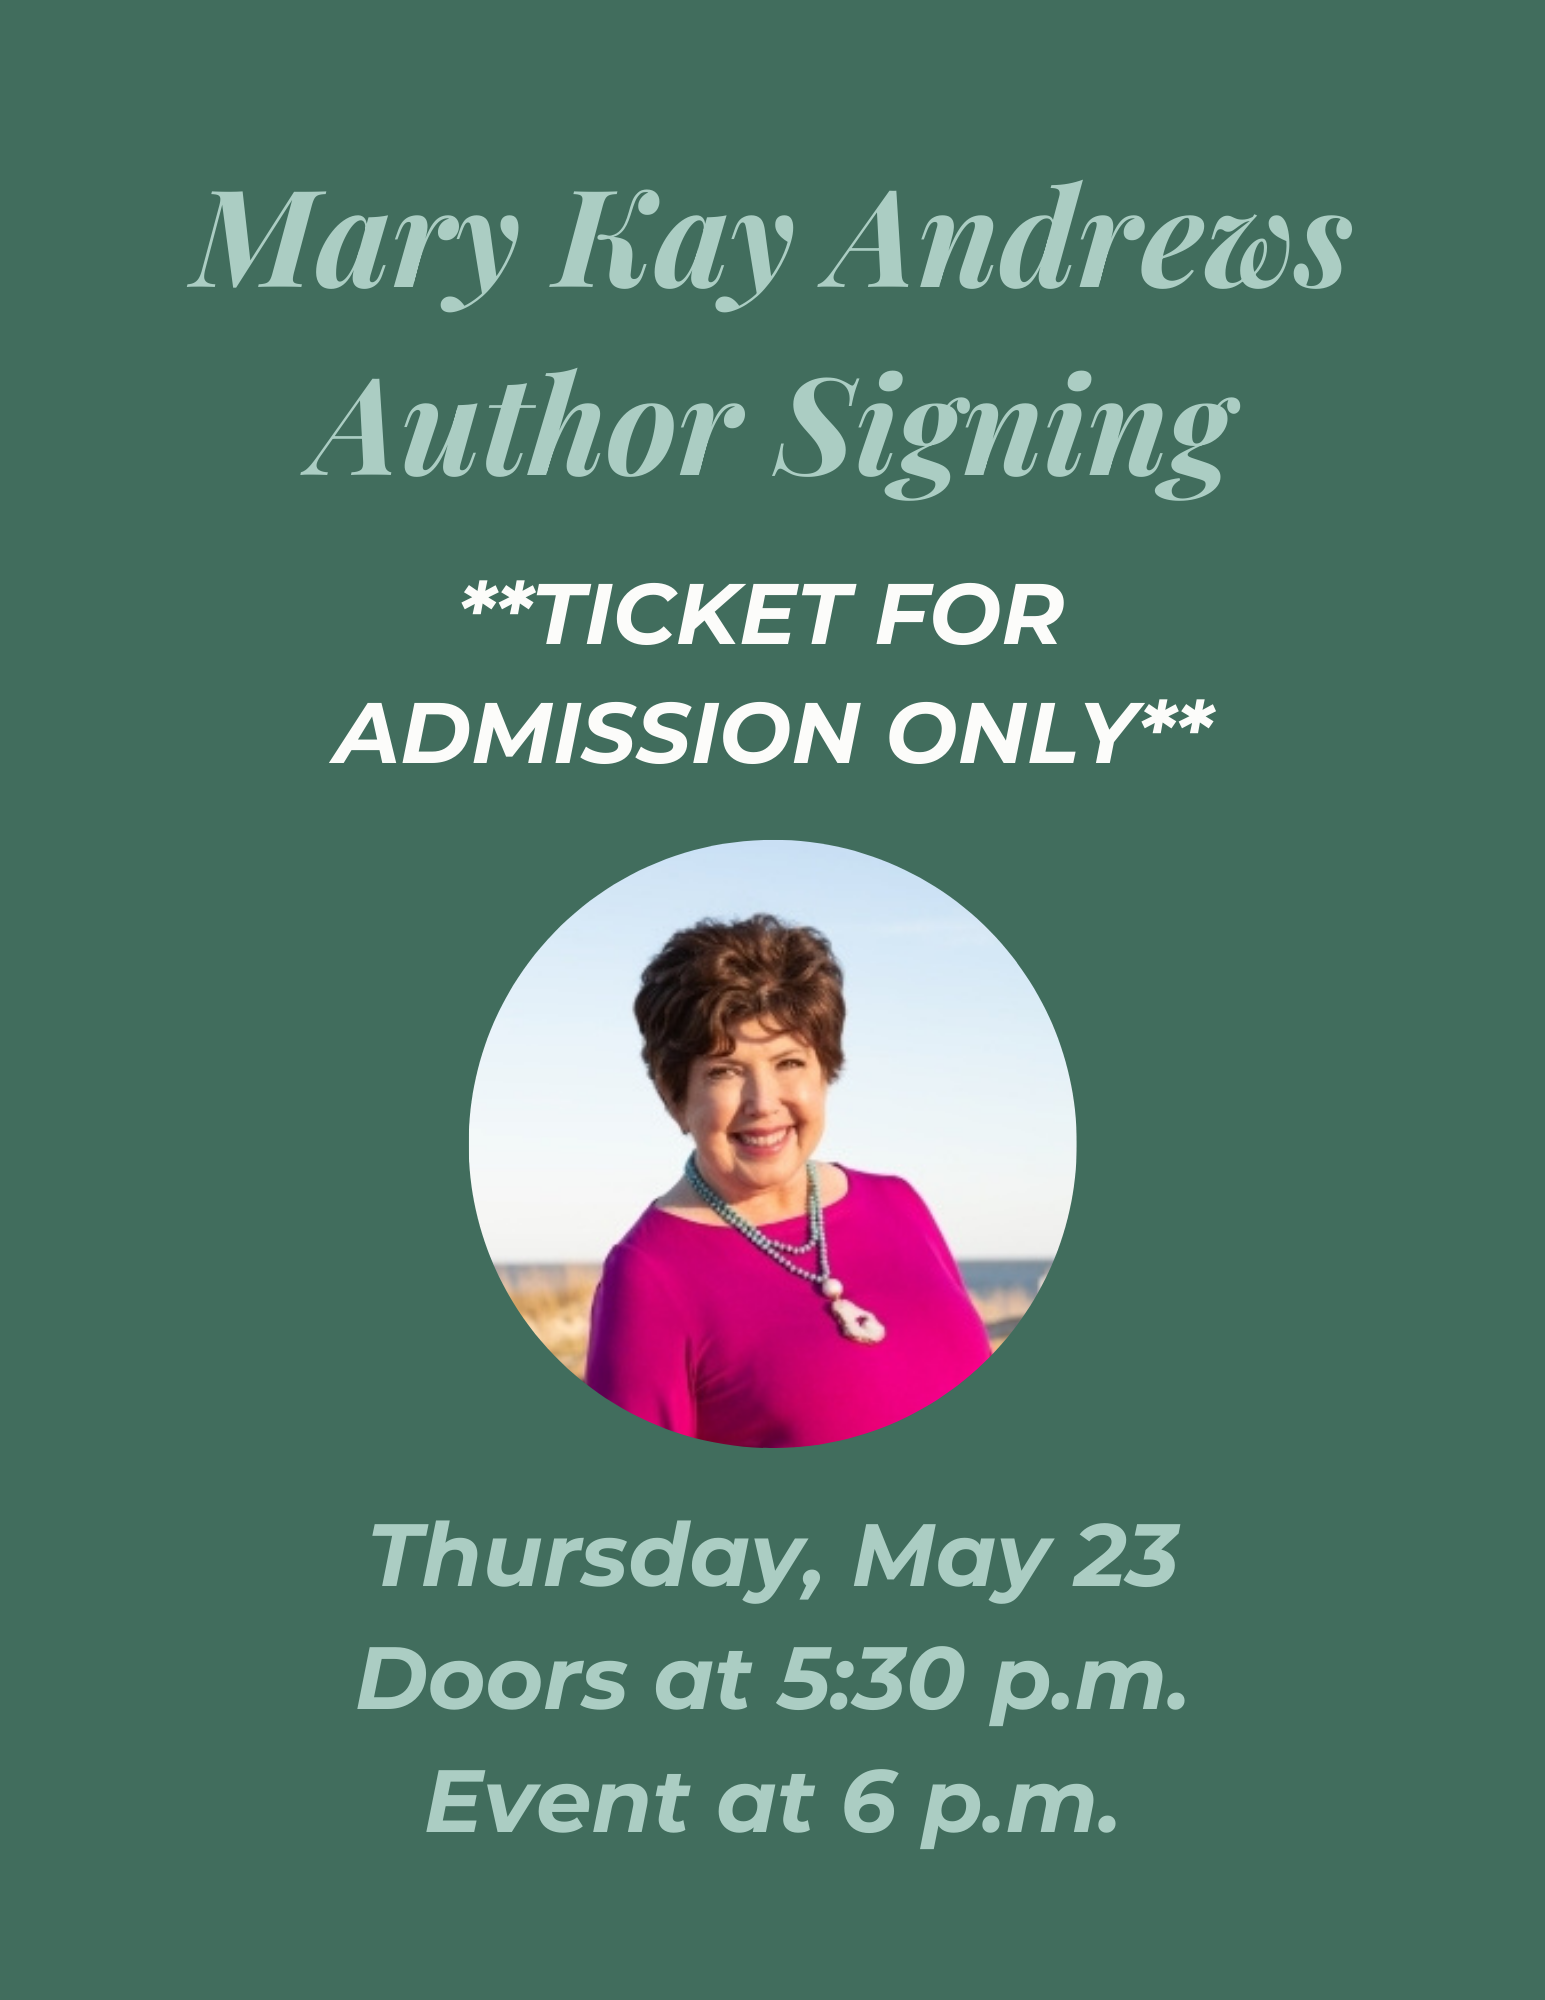 Mary Kay Andrews Author Signing: Ticket Only